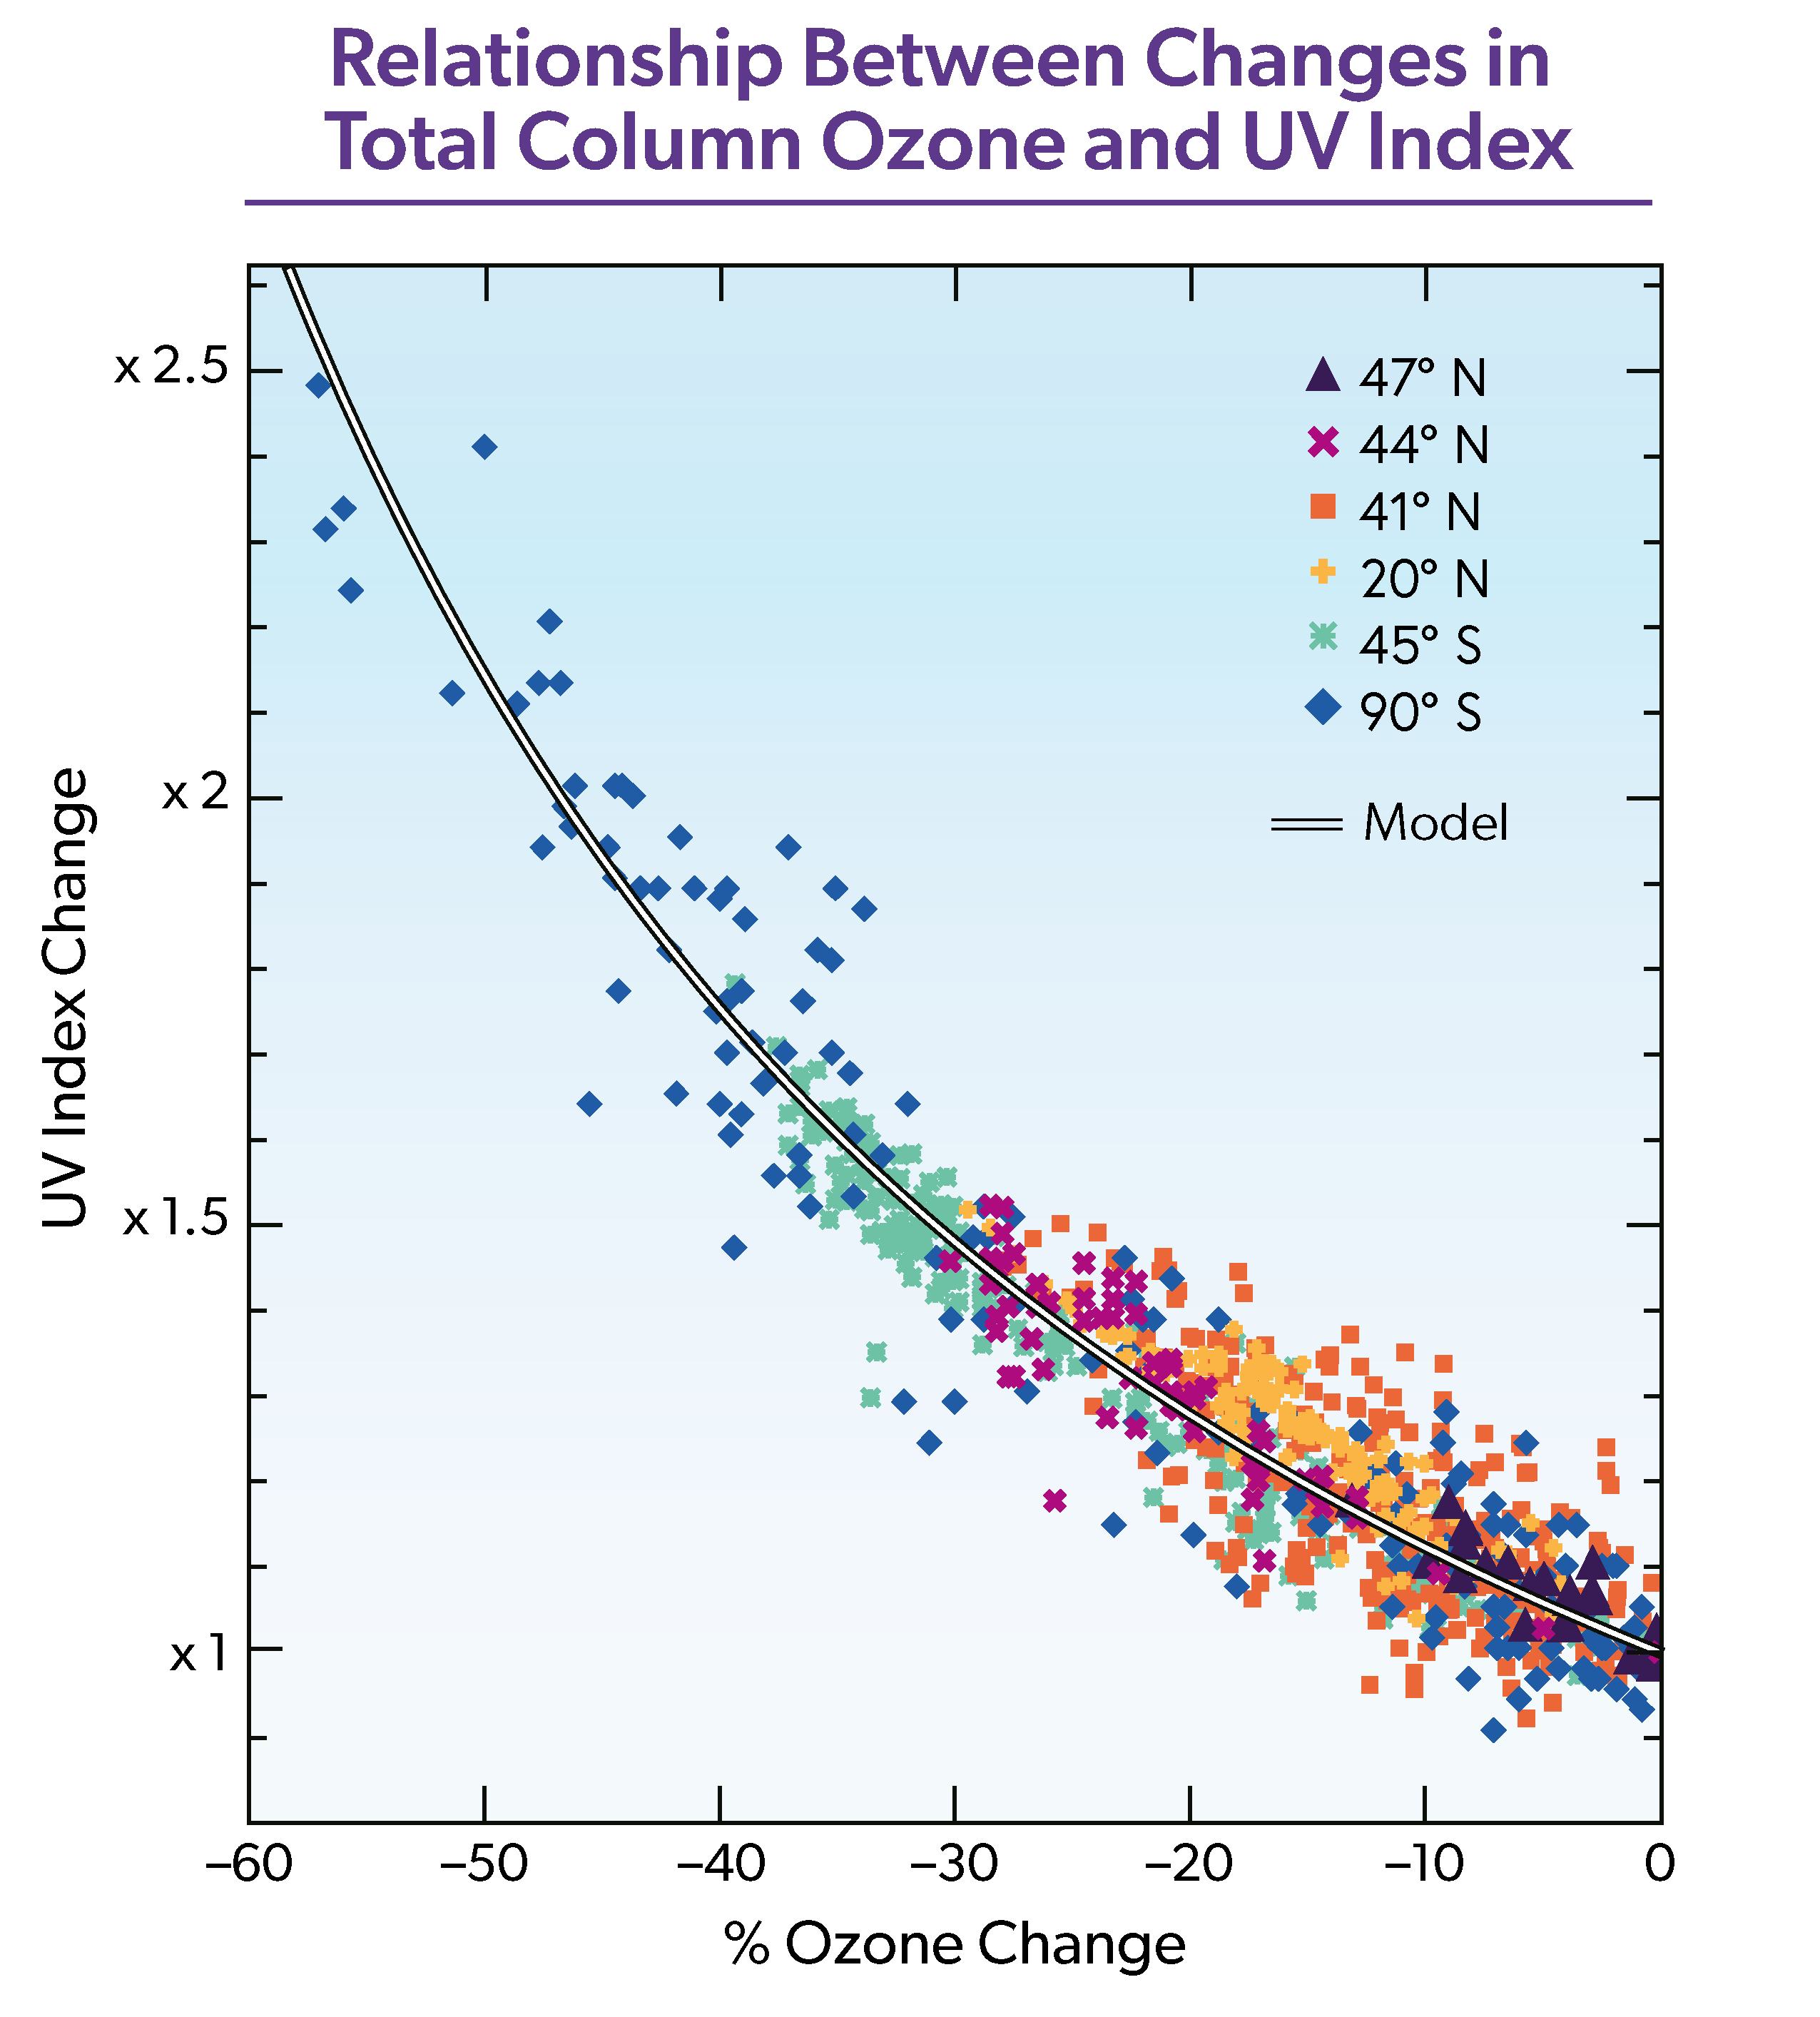 Relationship Between Changes in Total Column Ozone and the UV Index